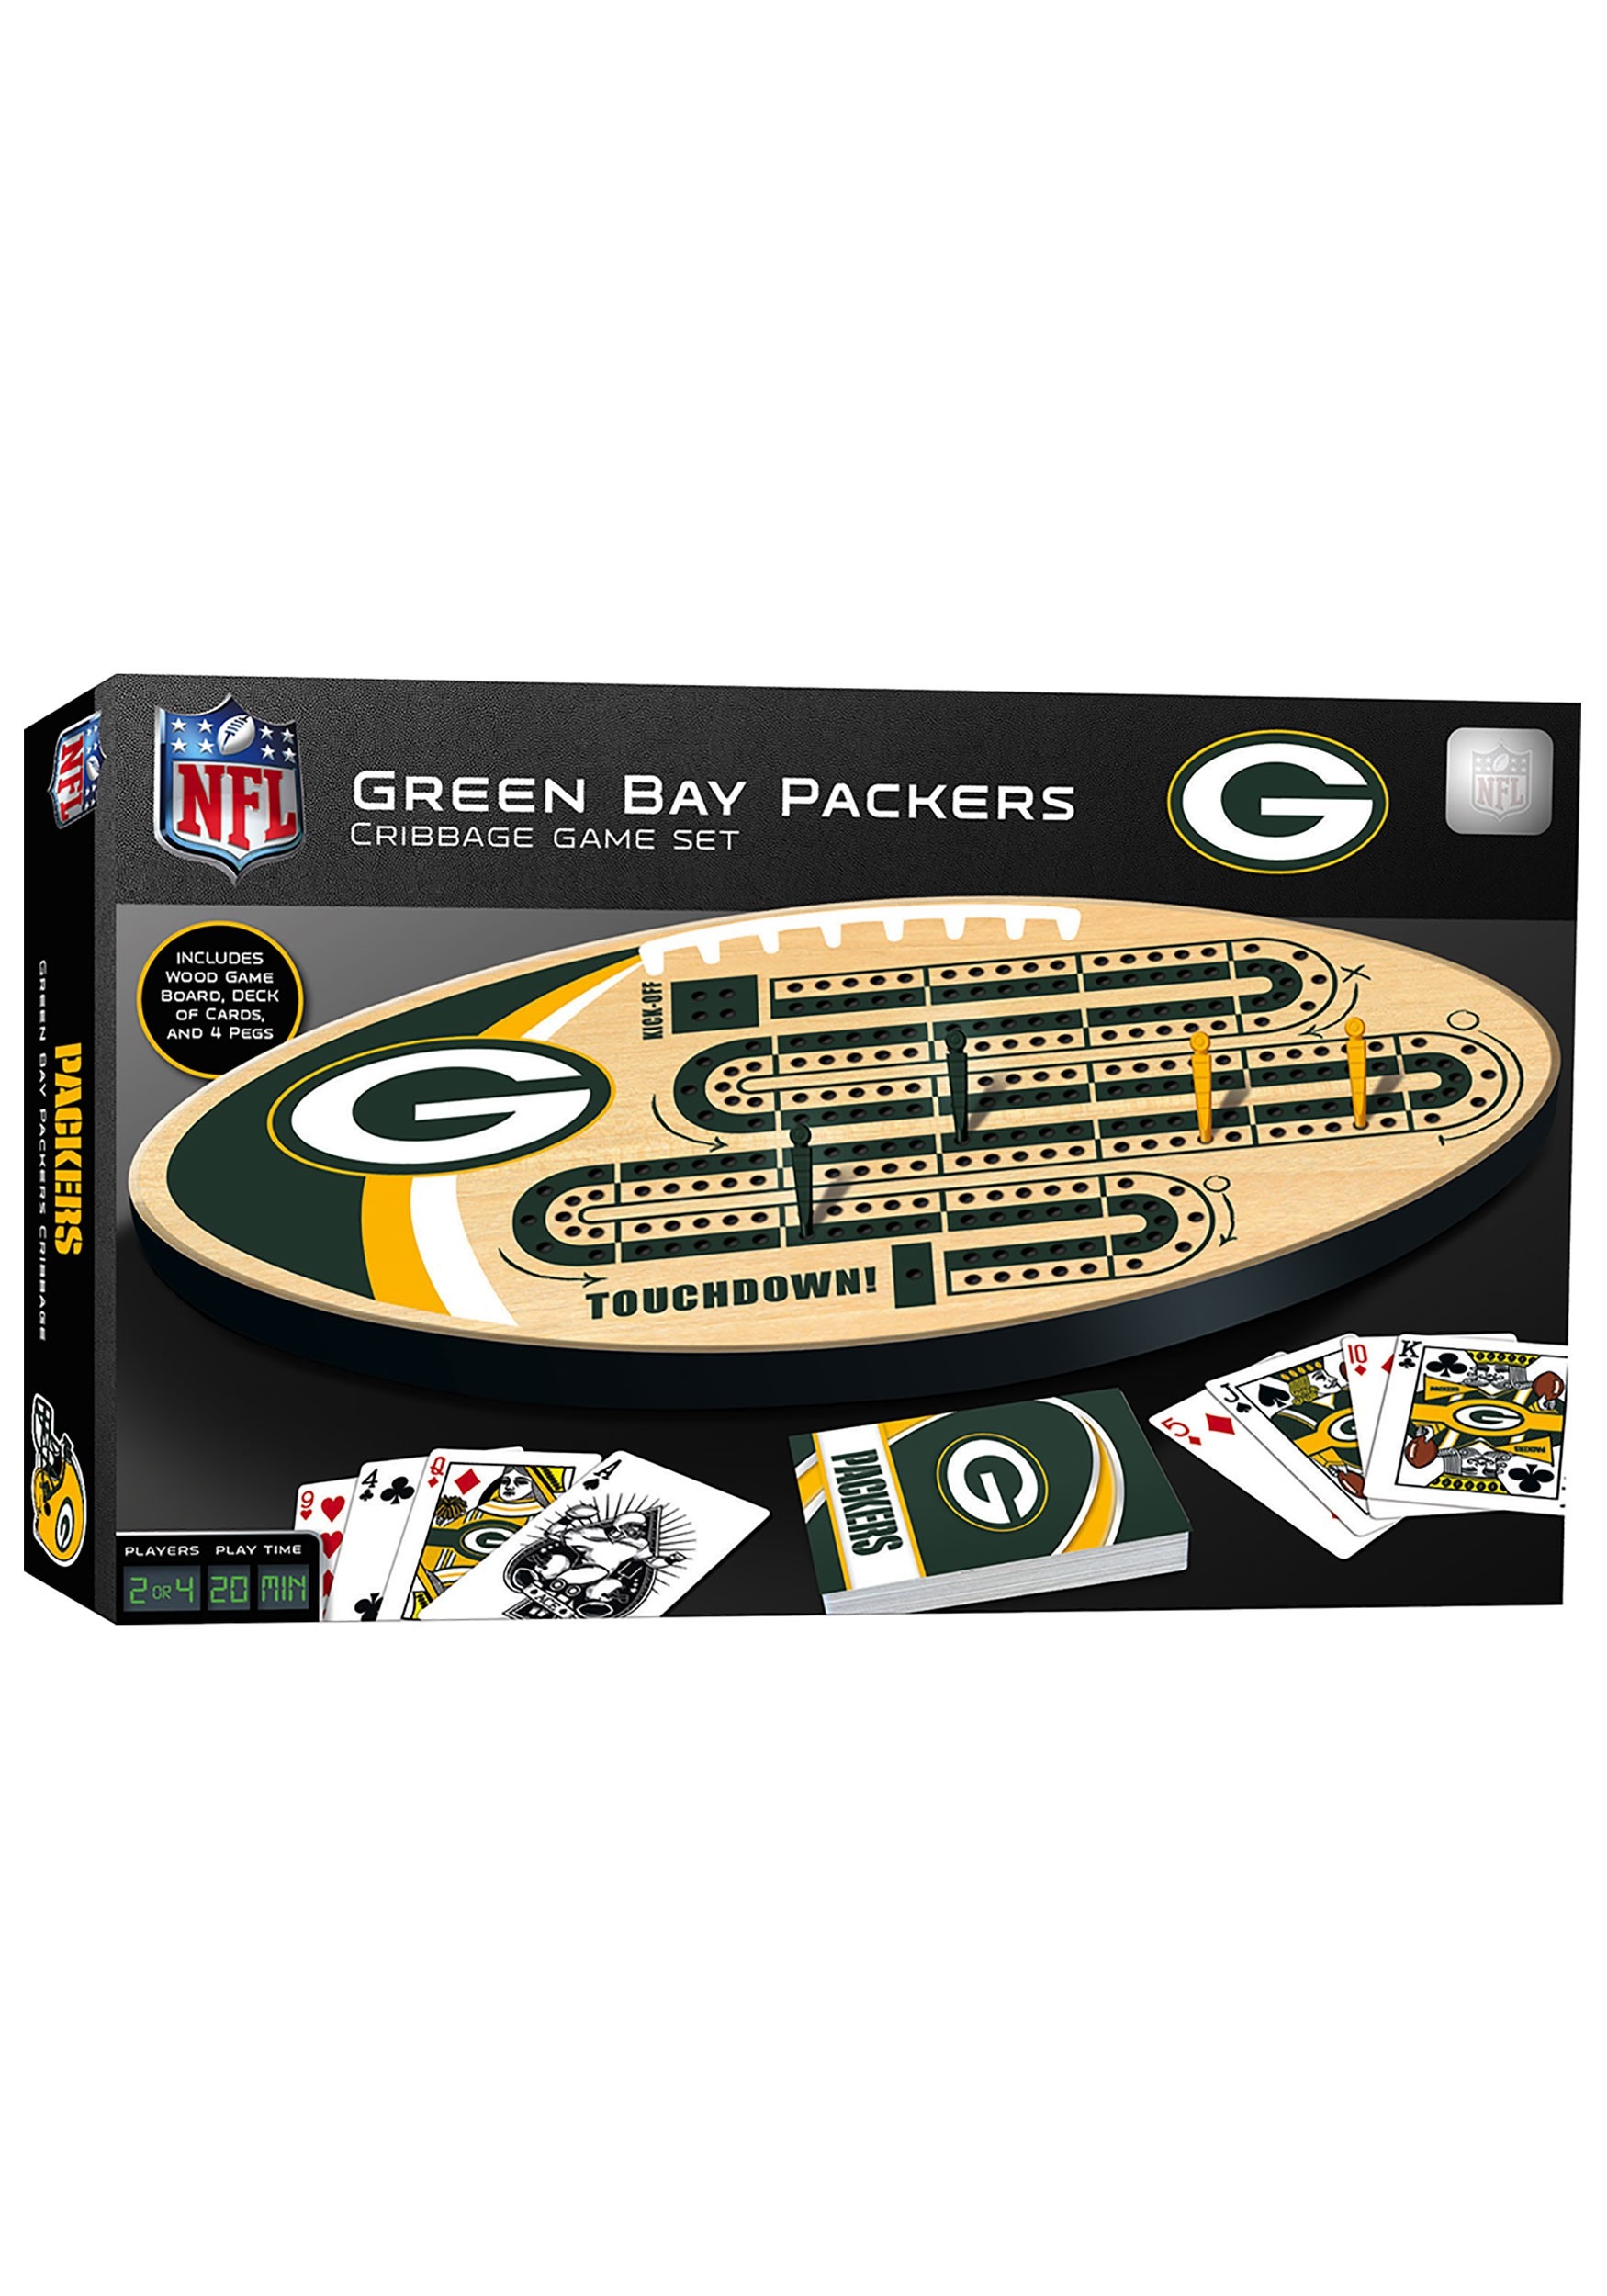 Green Bay Packers NFL Cribbage Set